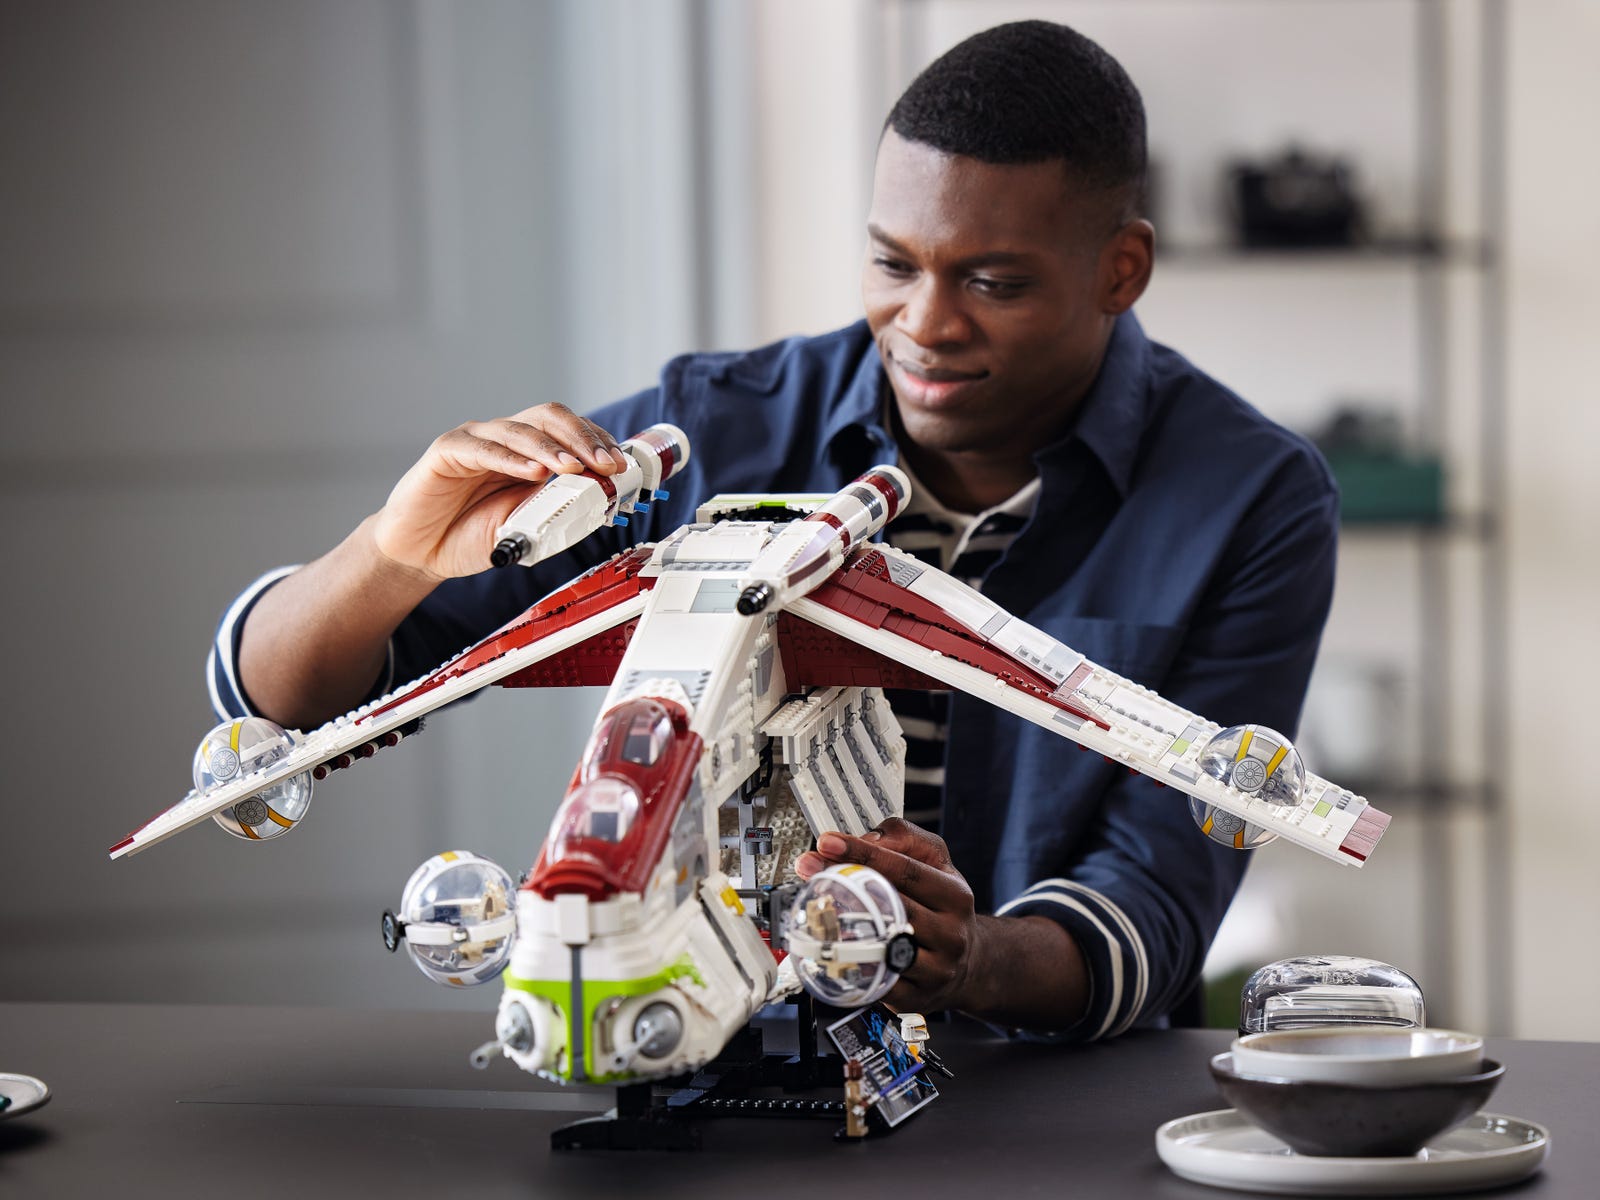 Lego releases massive 'Star Wars' UCS Republic Gunship with 3,292 pieces